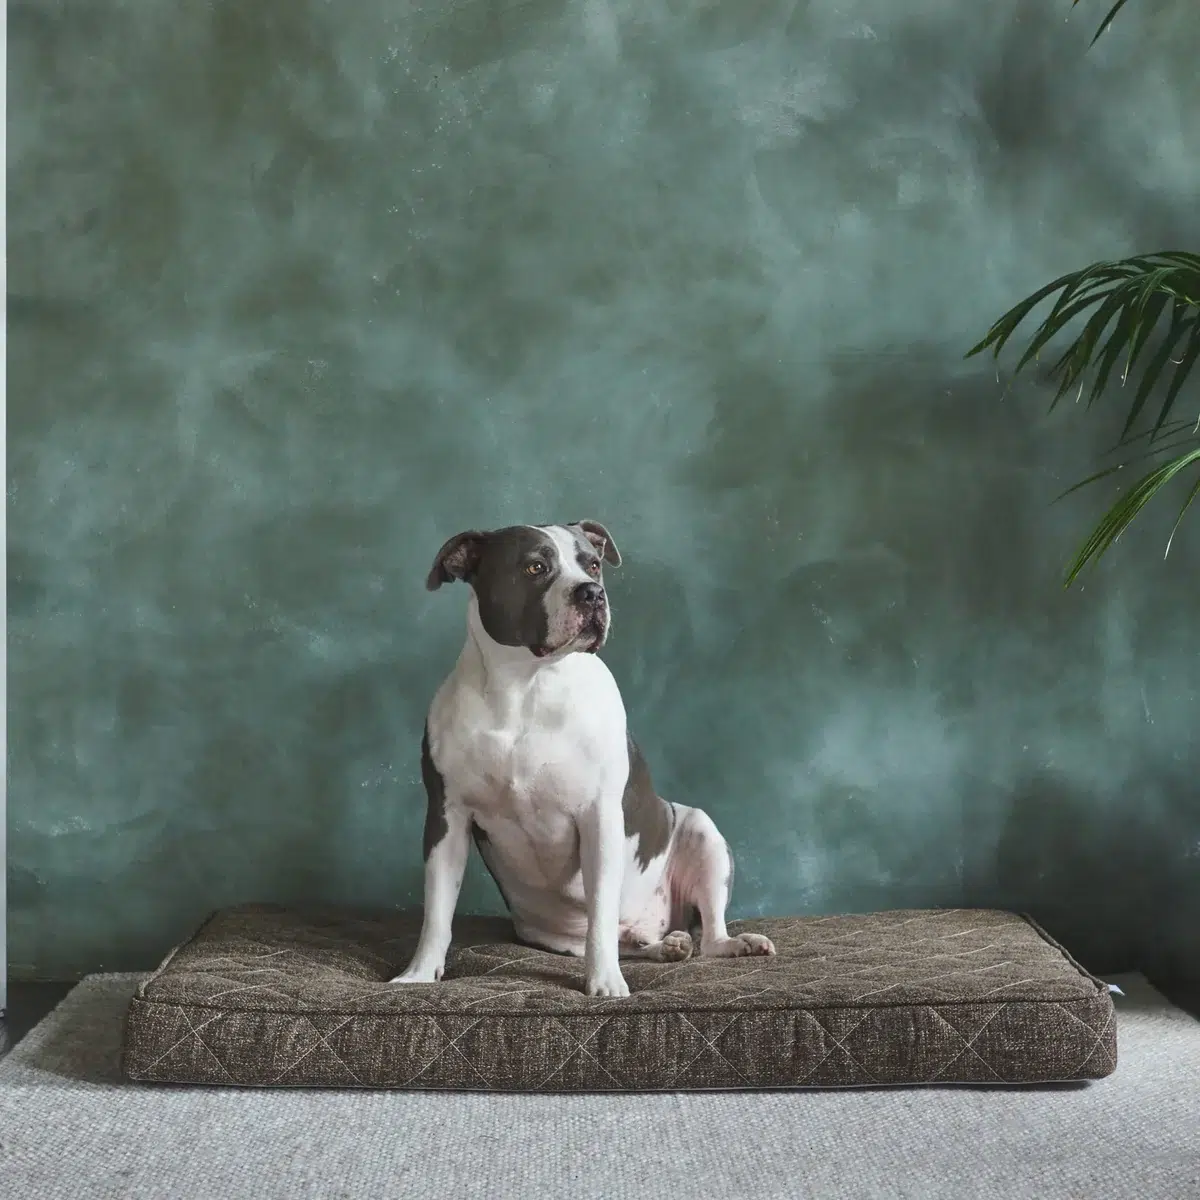 A black and white dog sits on a brown cushion in front of a green textured wall with a plant on the right side.